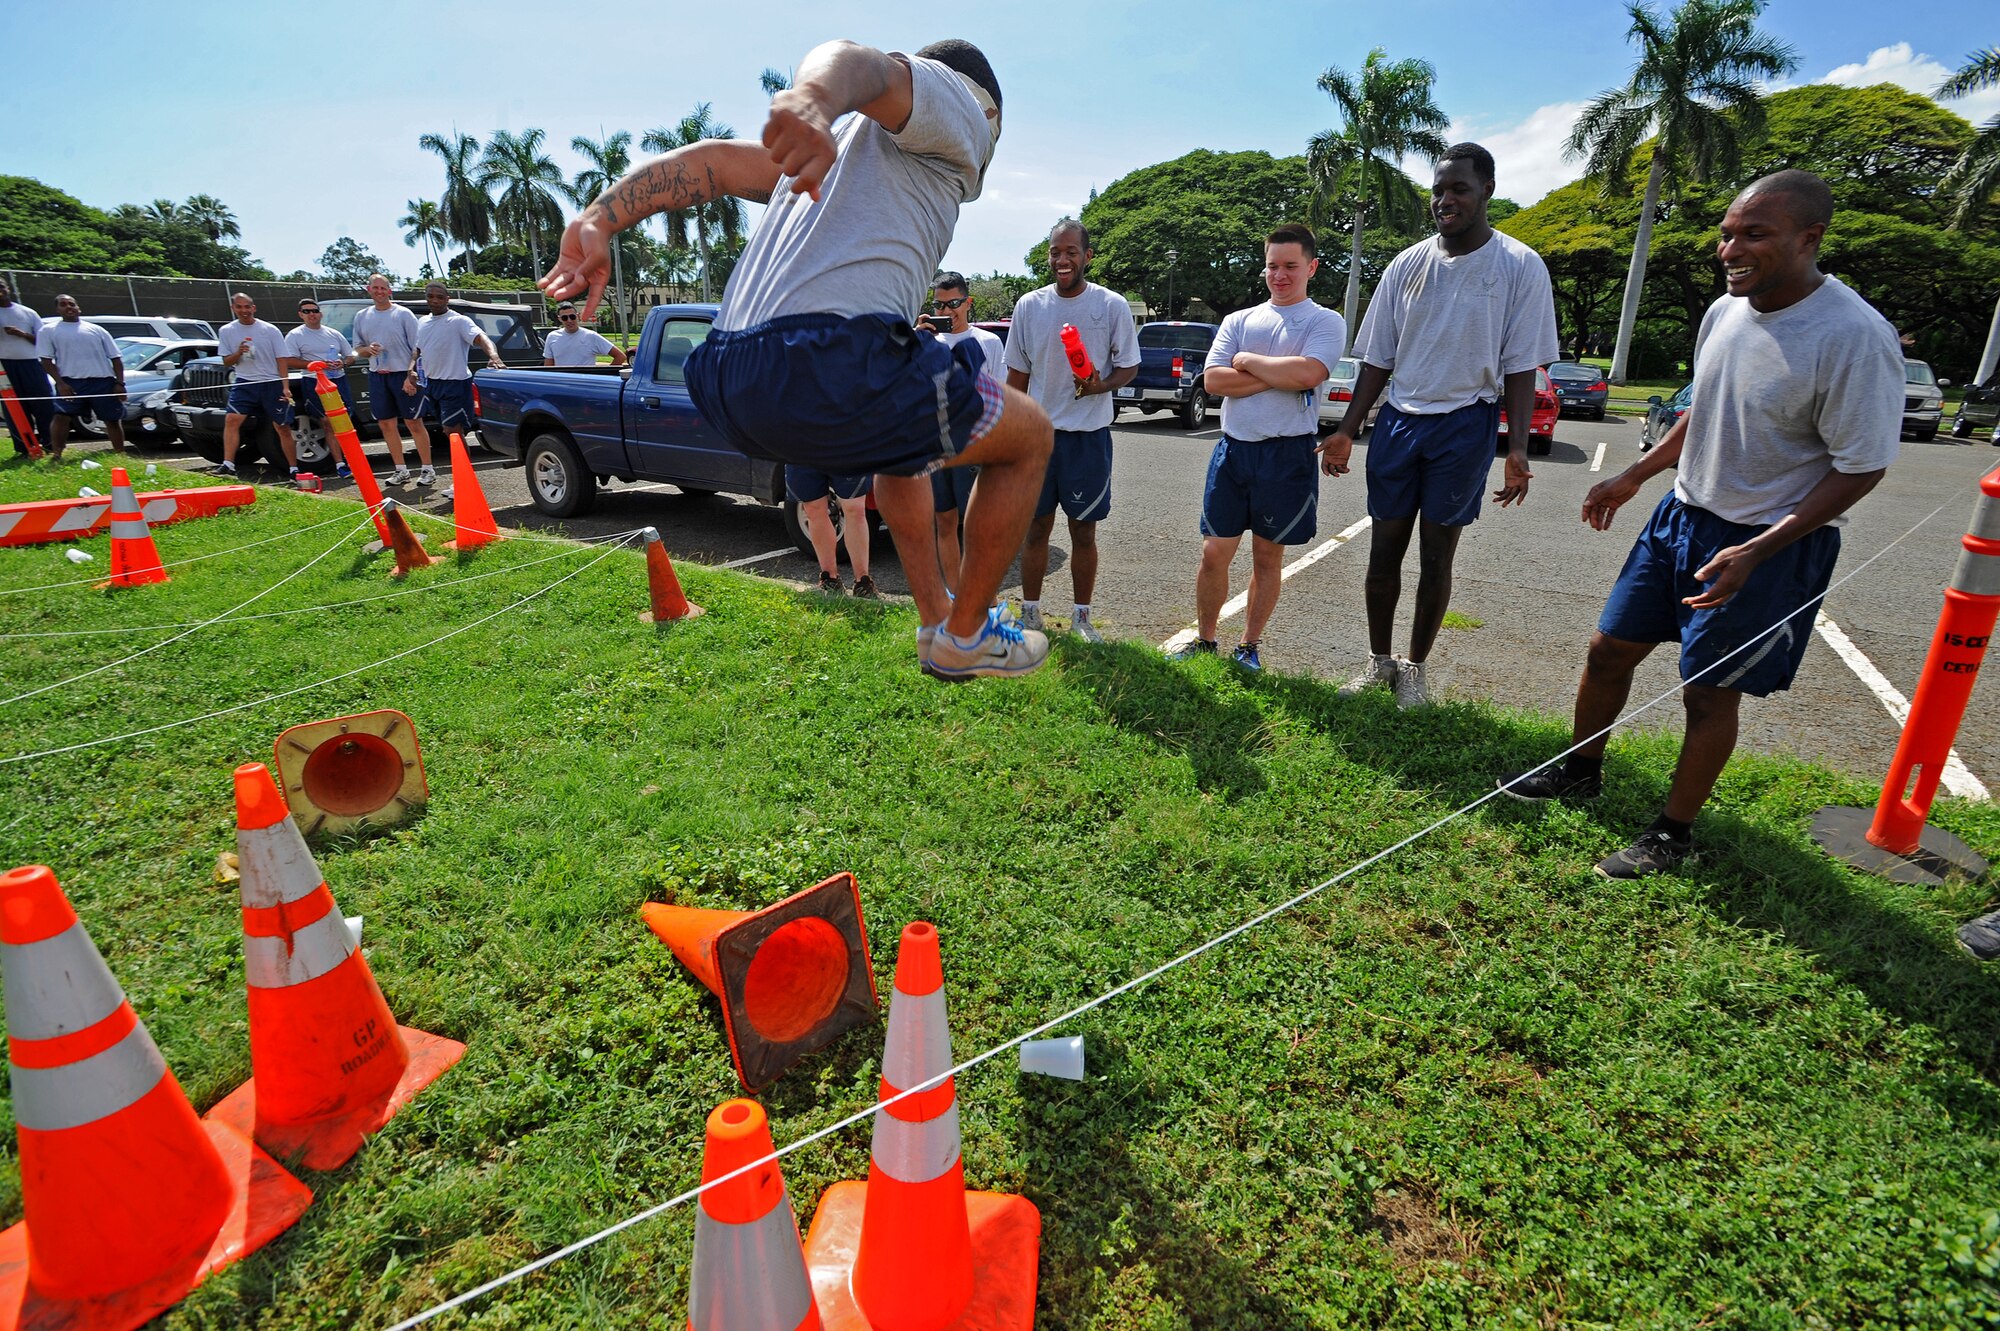 Airmen from the 647th Civil Engineer Squadron help guide a fellow blindfolded Airmen through a simulated land mine obstacle course during the 647th CES Wingman Day at Joint Base Pearl Harbor-Hickam, Hawaii, Feb. 19, 2014. Wingman Day encourages teamwork, and highlights the Air Force’s focus on its most valuable asset: Airmen. (U.S. Air Force photo/Master Sgt. Jerome S. Tayborn)